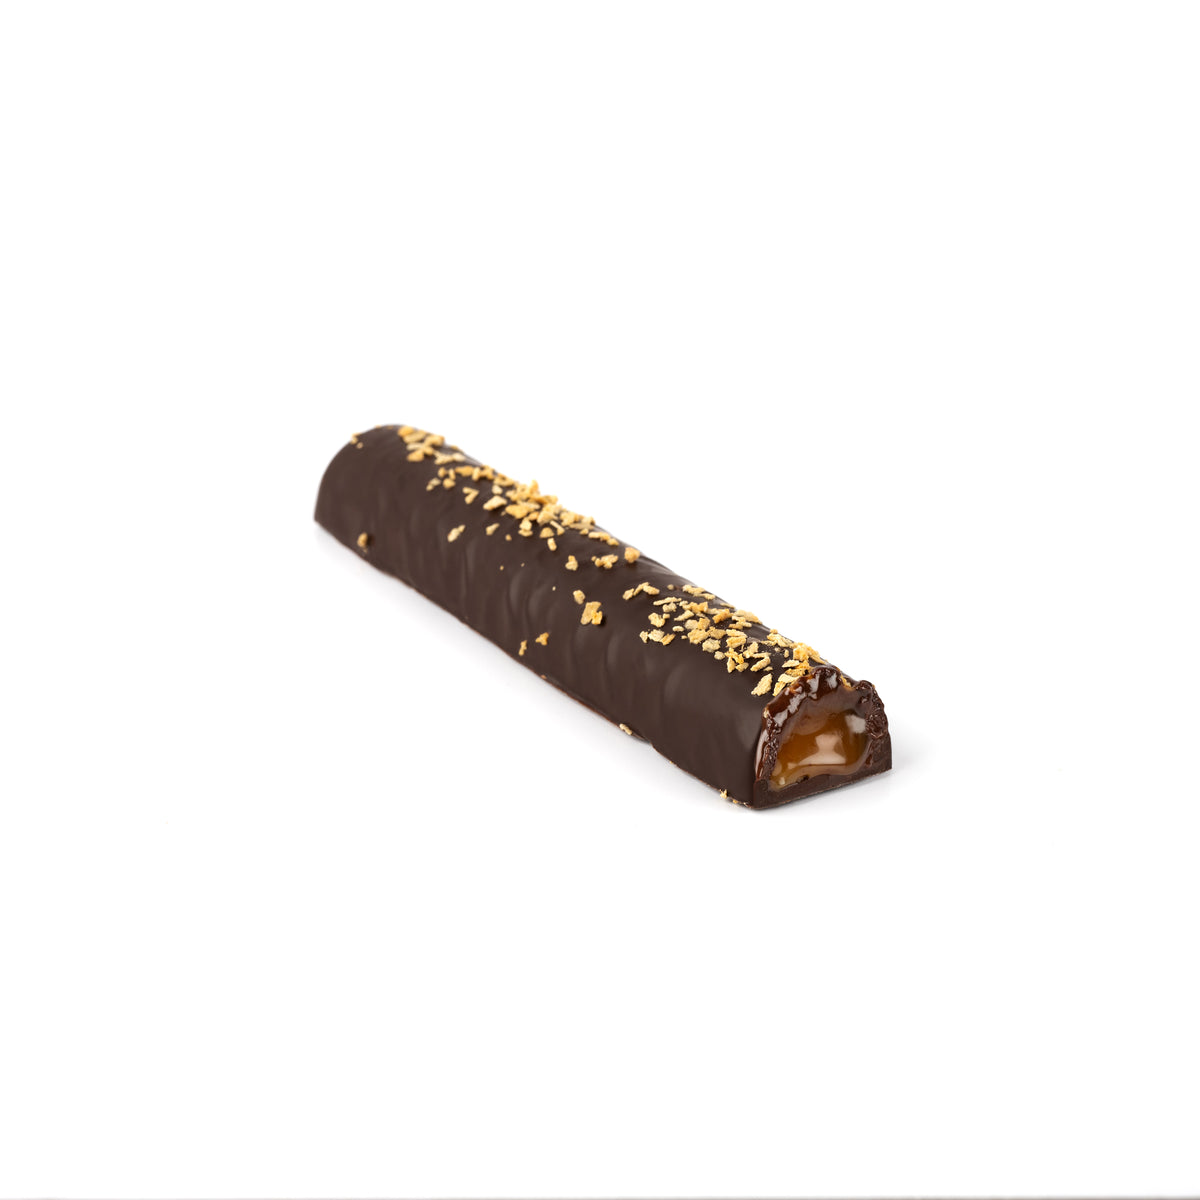 Maple filled chocolate bar